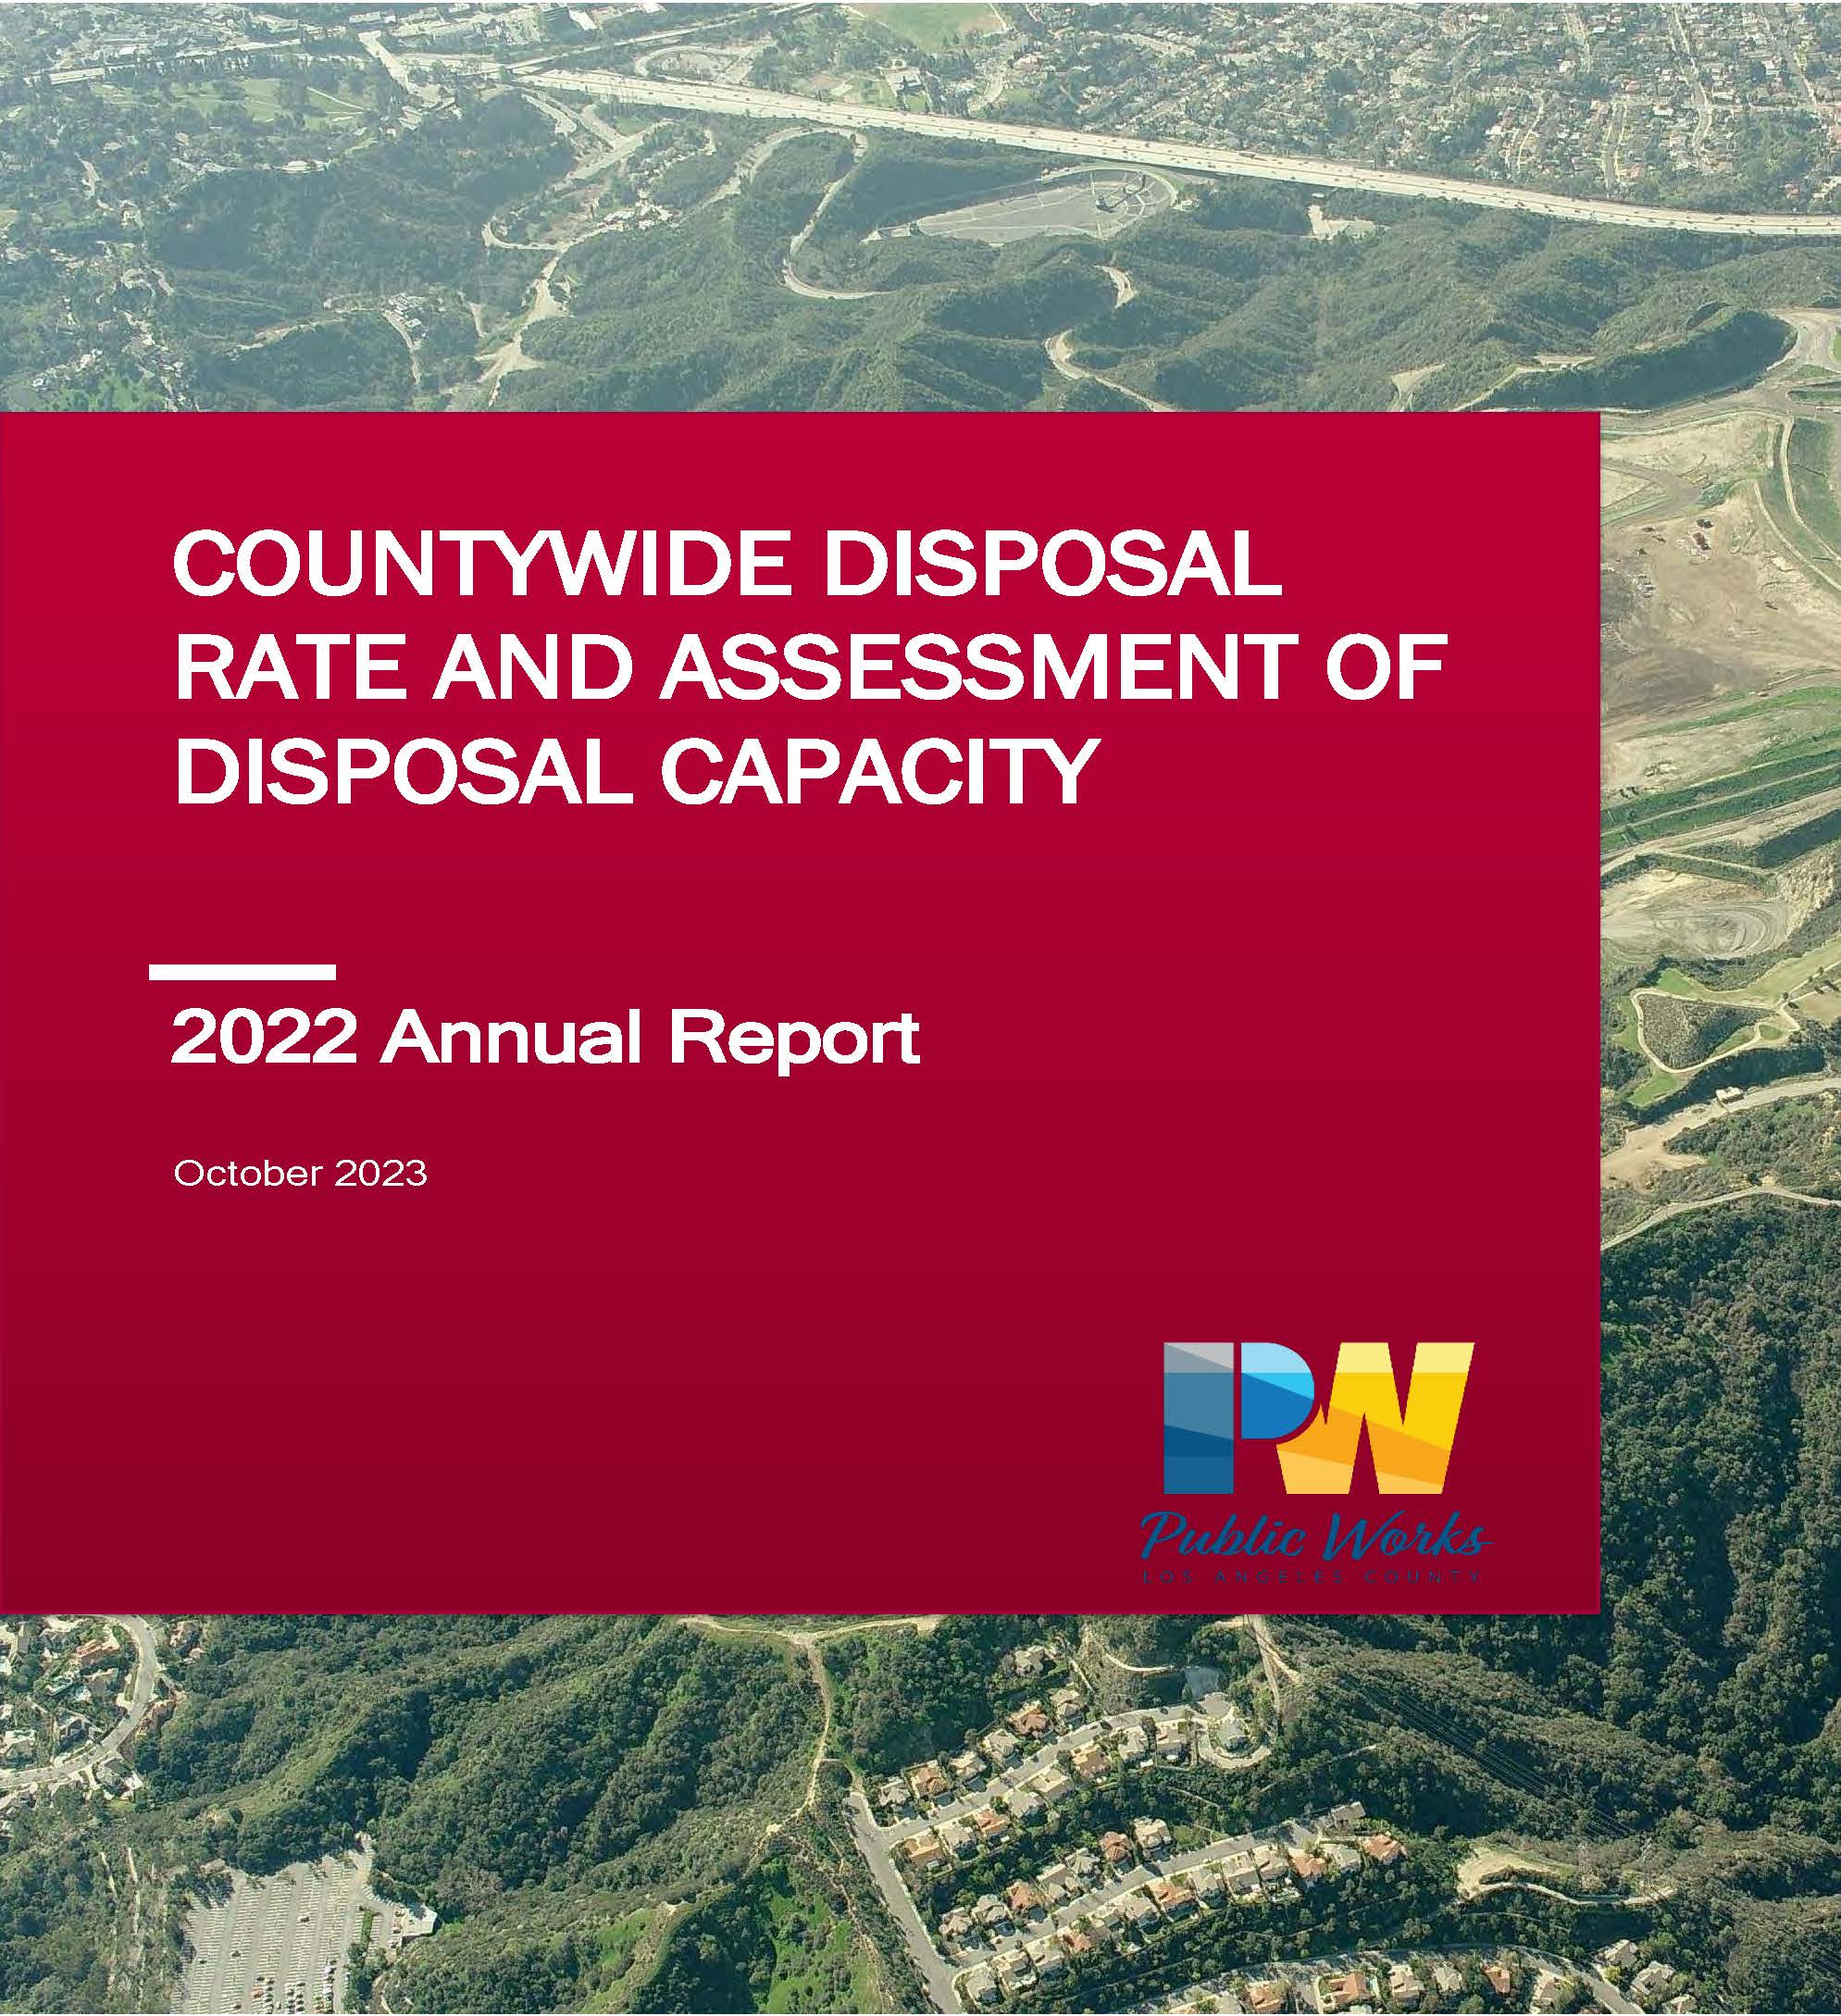 Countywide Disposal Rate and Assessment of Disposal Capacity, 2022 Annual Report